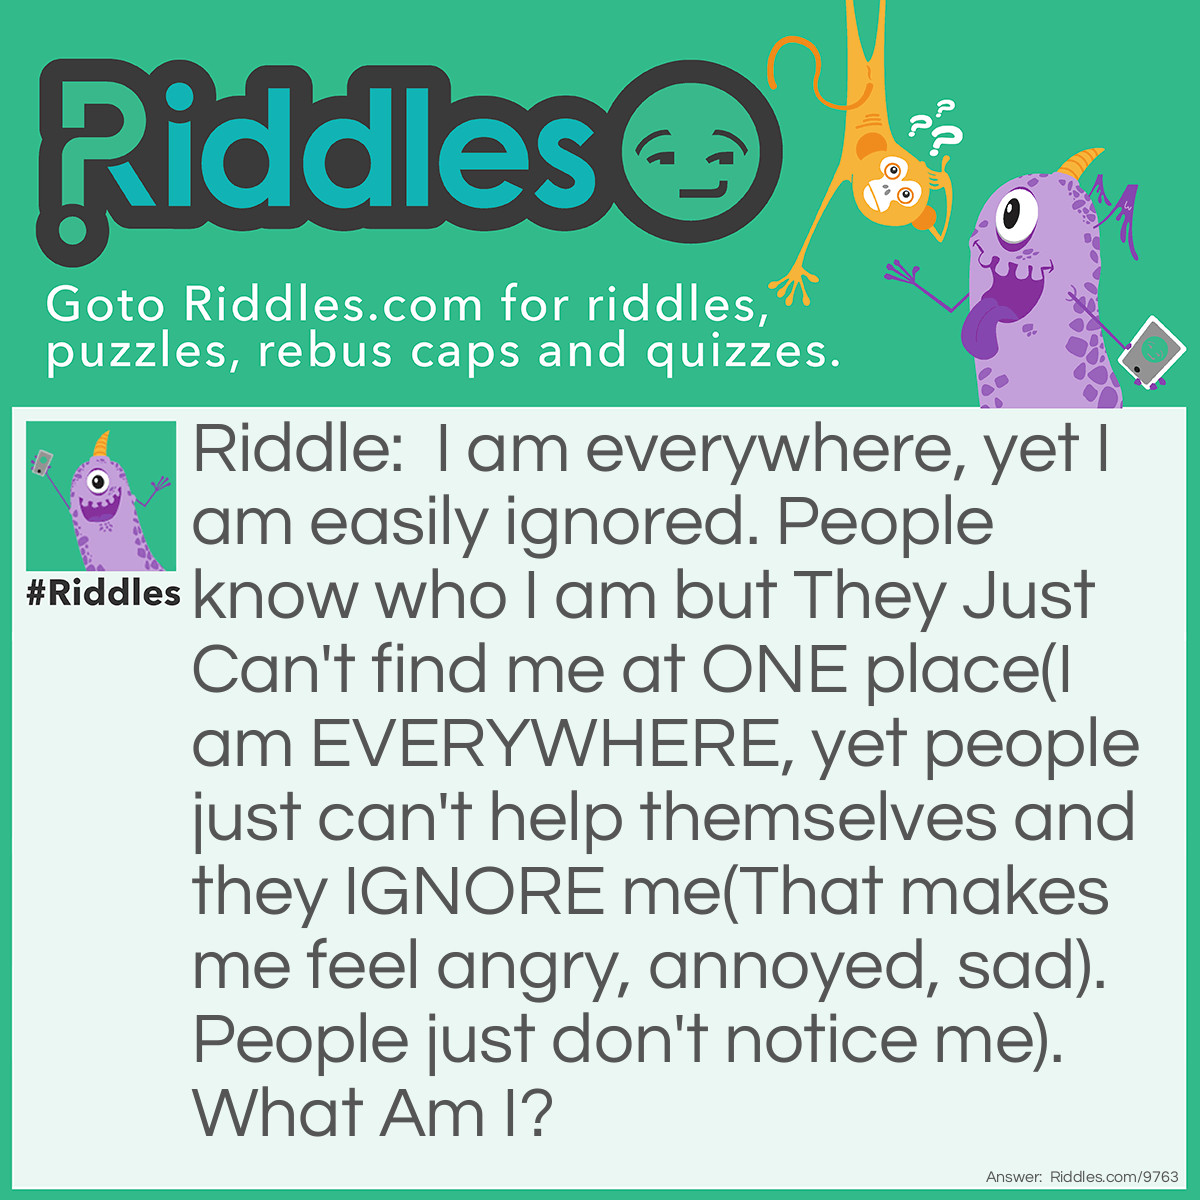 Riddle: I am everywhere, yet I am easily ignored. People know who I am but They Just Can't find me at ONE place(I am EVERYWHERE, yet people just can't help themselves and they IGNORE me(That makes me feel angry, annoyed, sad). People just don't notice me). What Am I? Answer: I am air! (hehehaha)